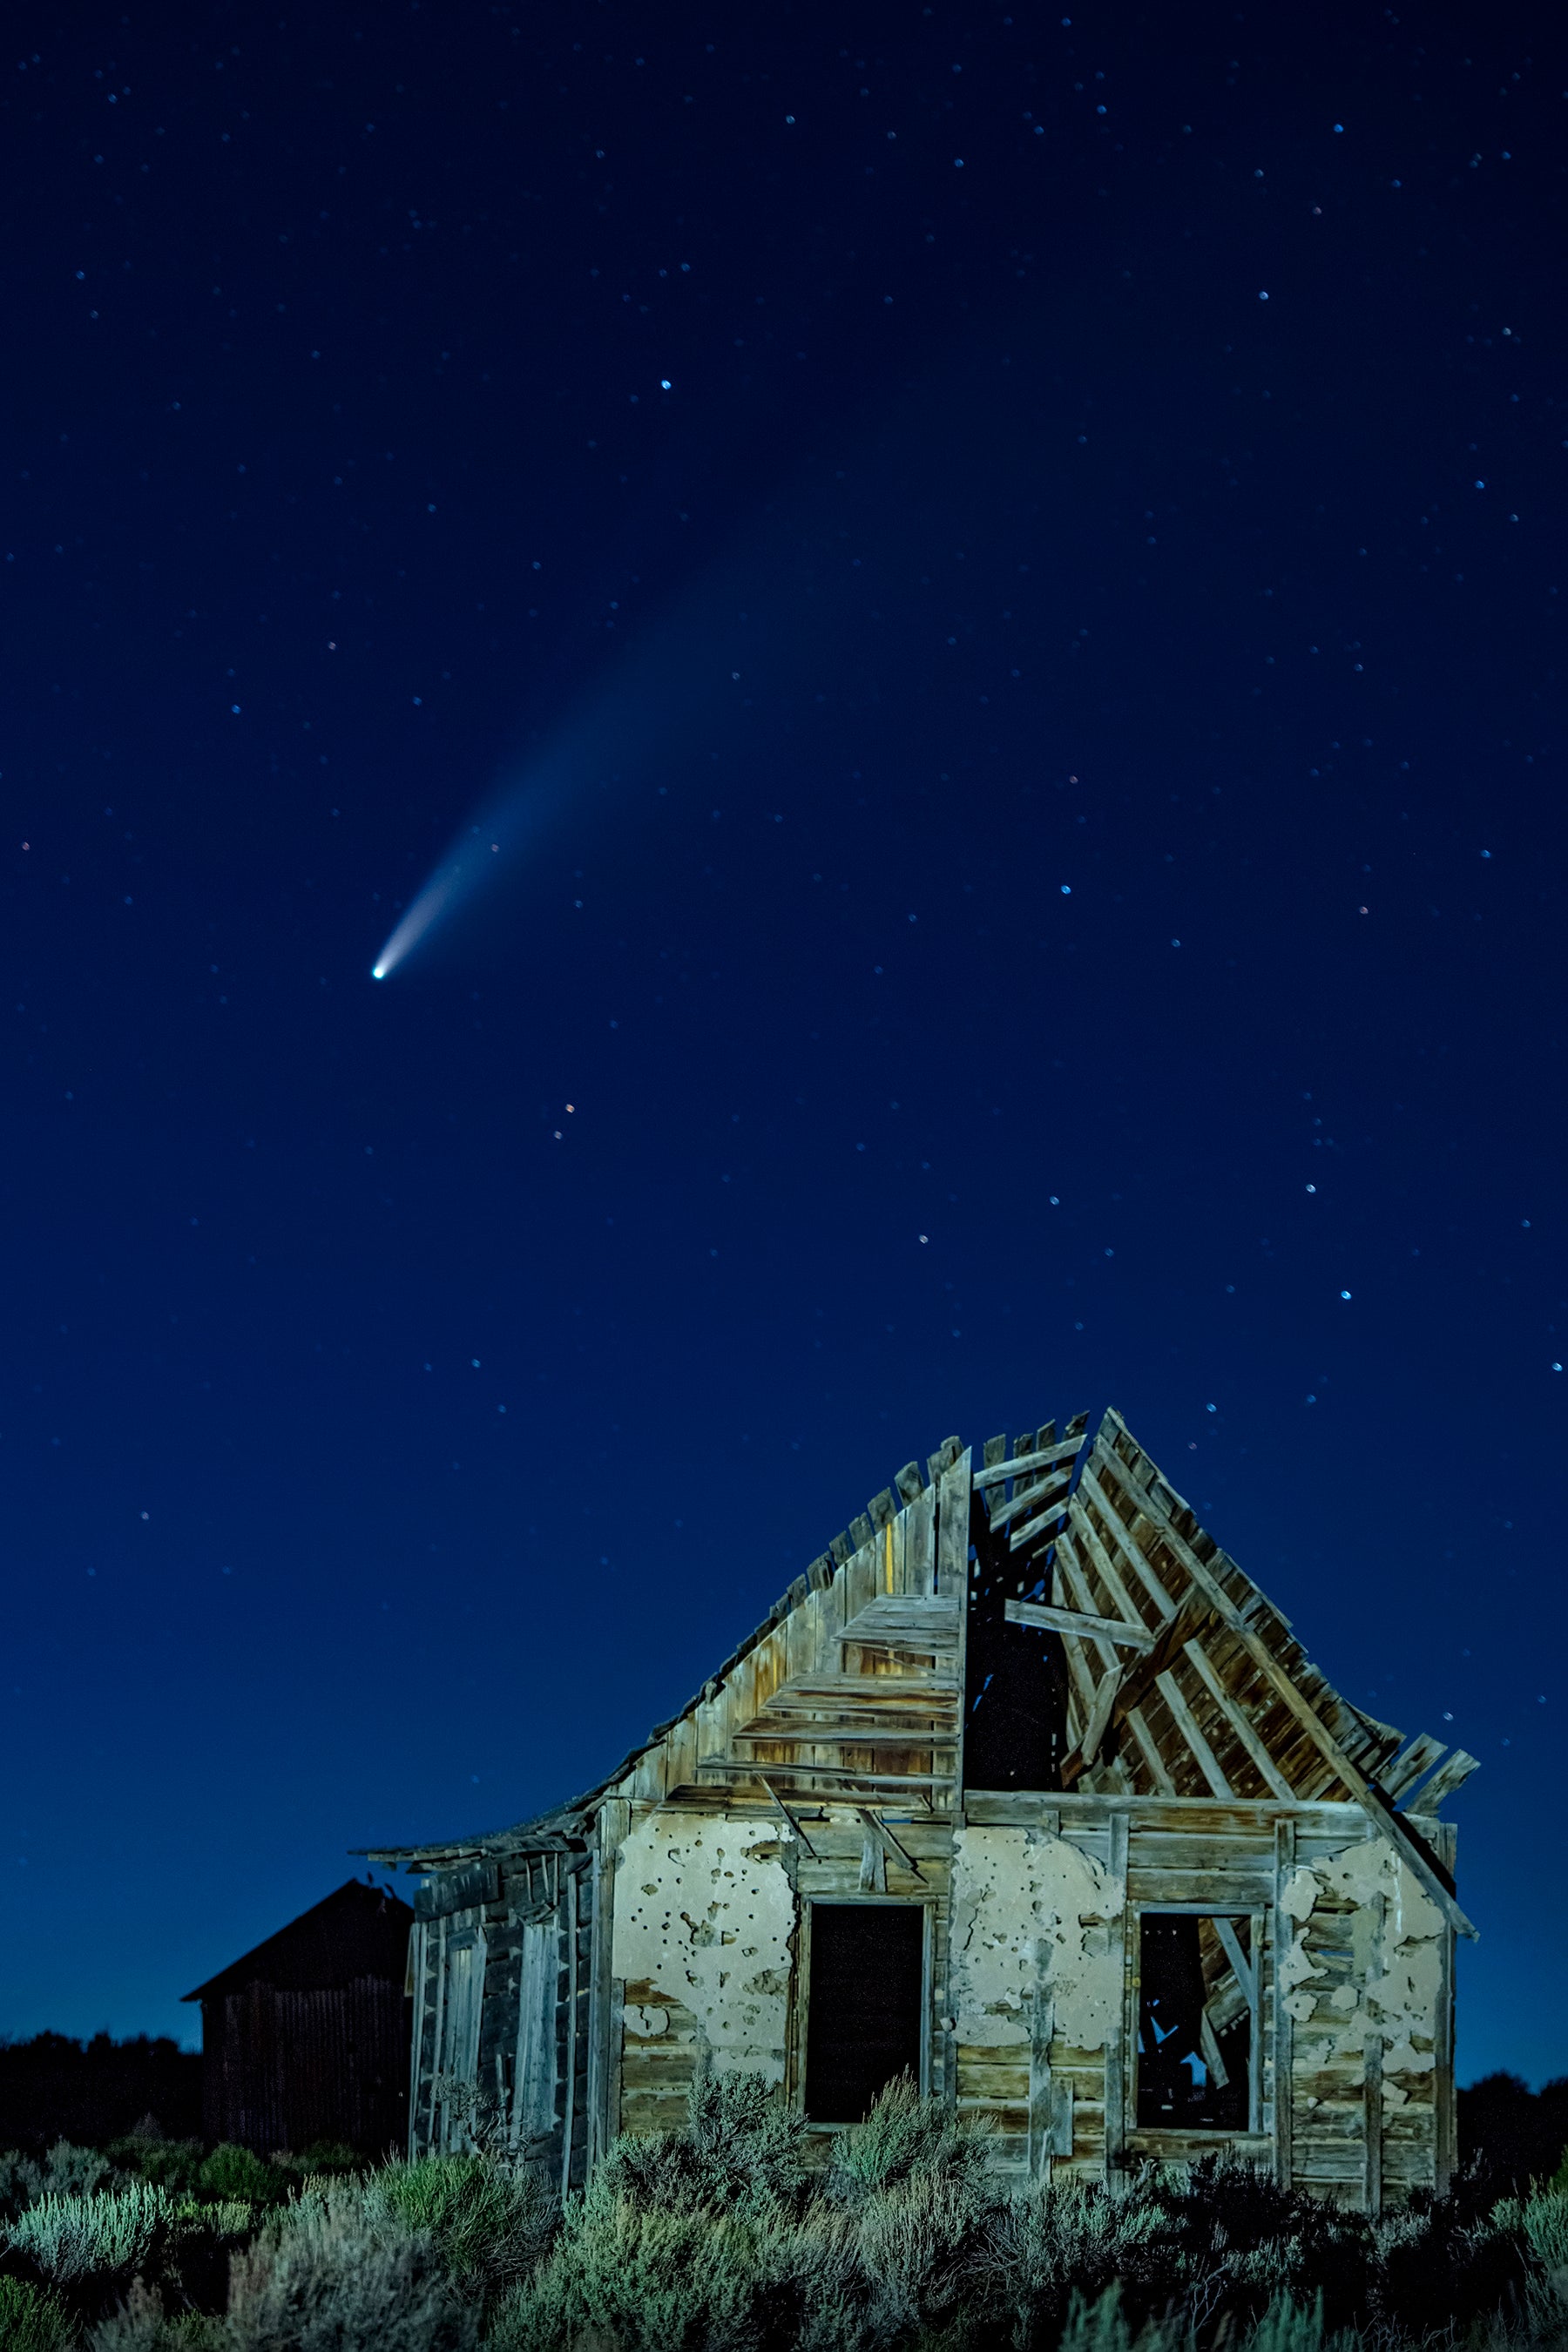 Comet Neowise fills the night sky over the Oregon Trail era ruins in the Piedmont area east of Evanston Wyoming